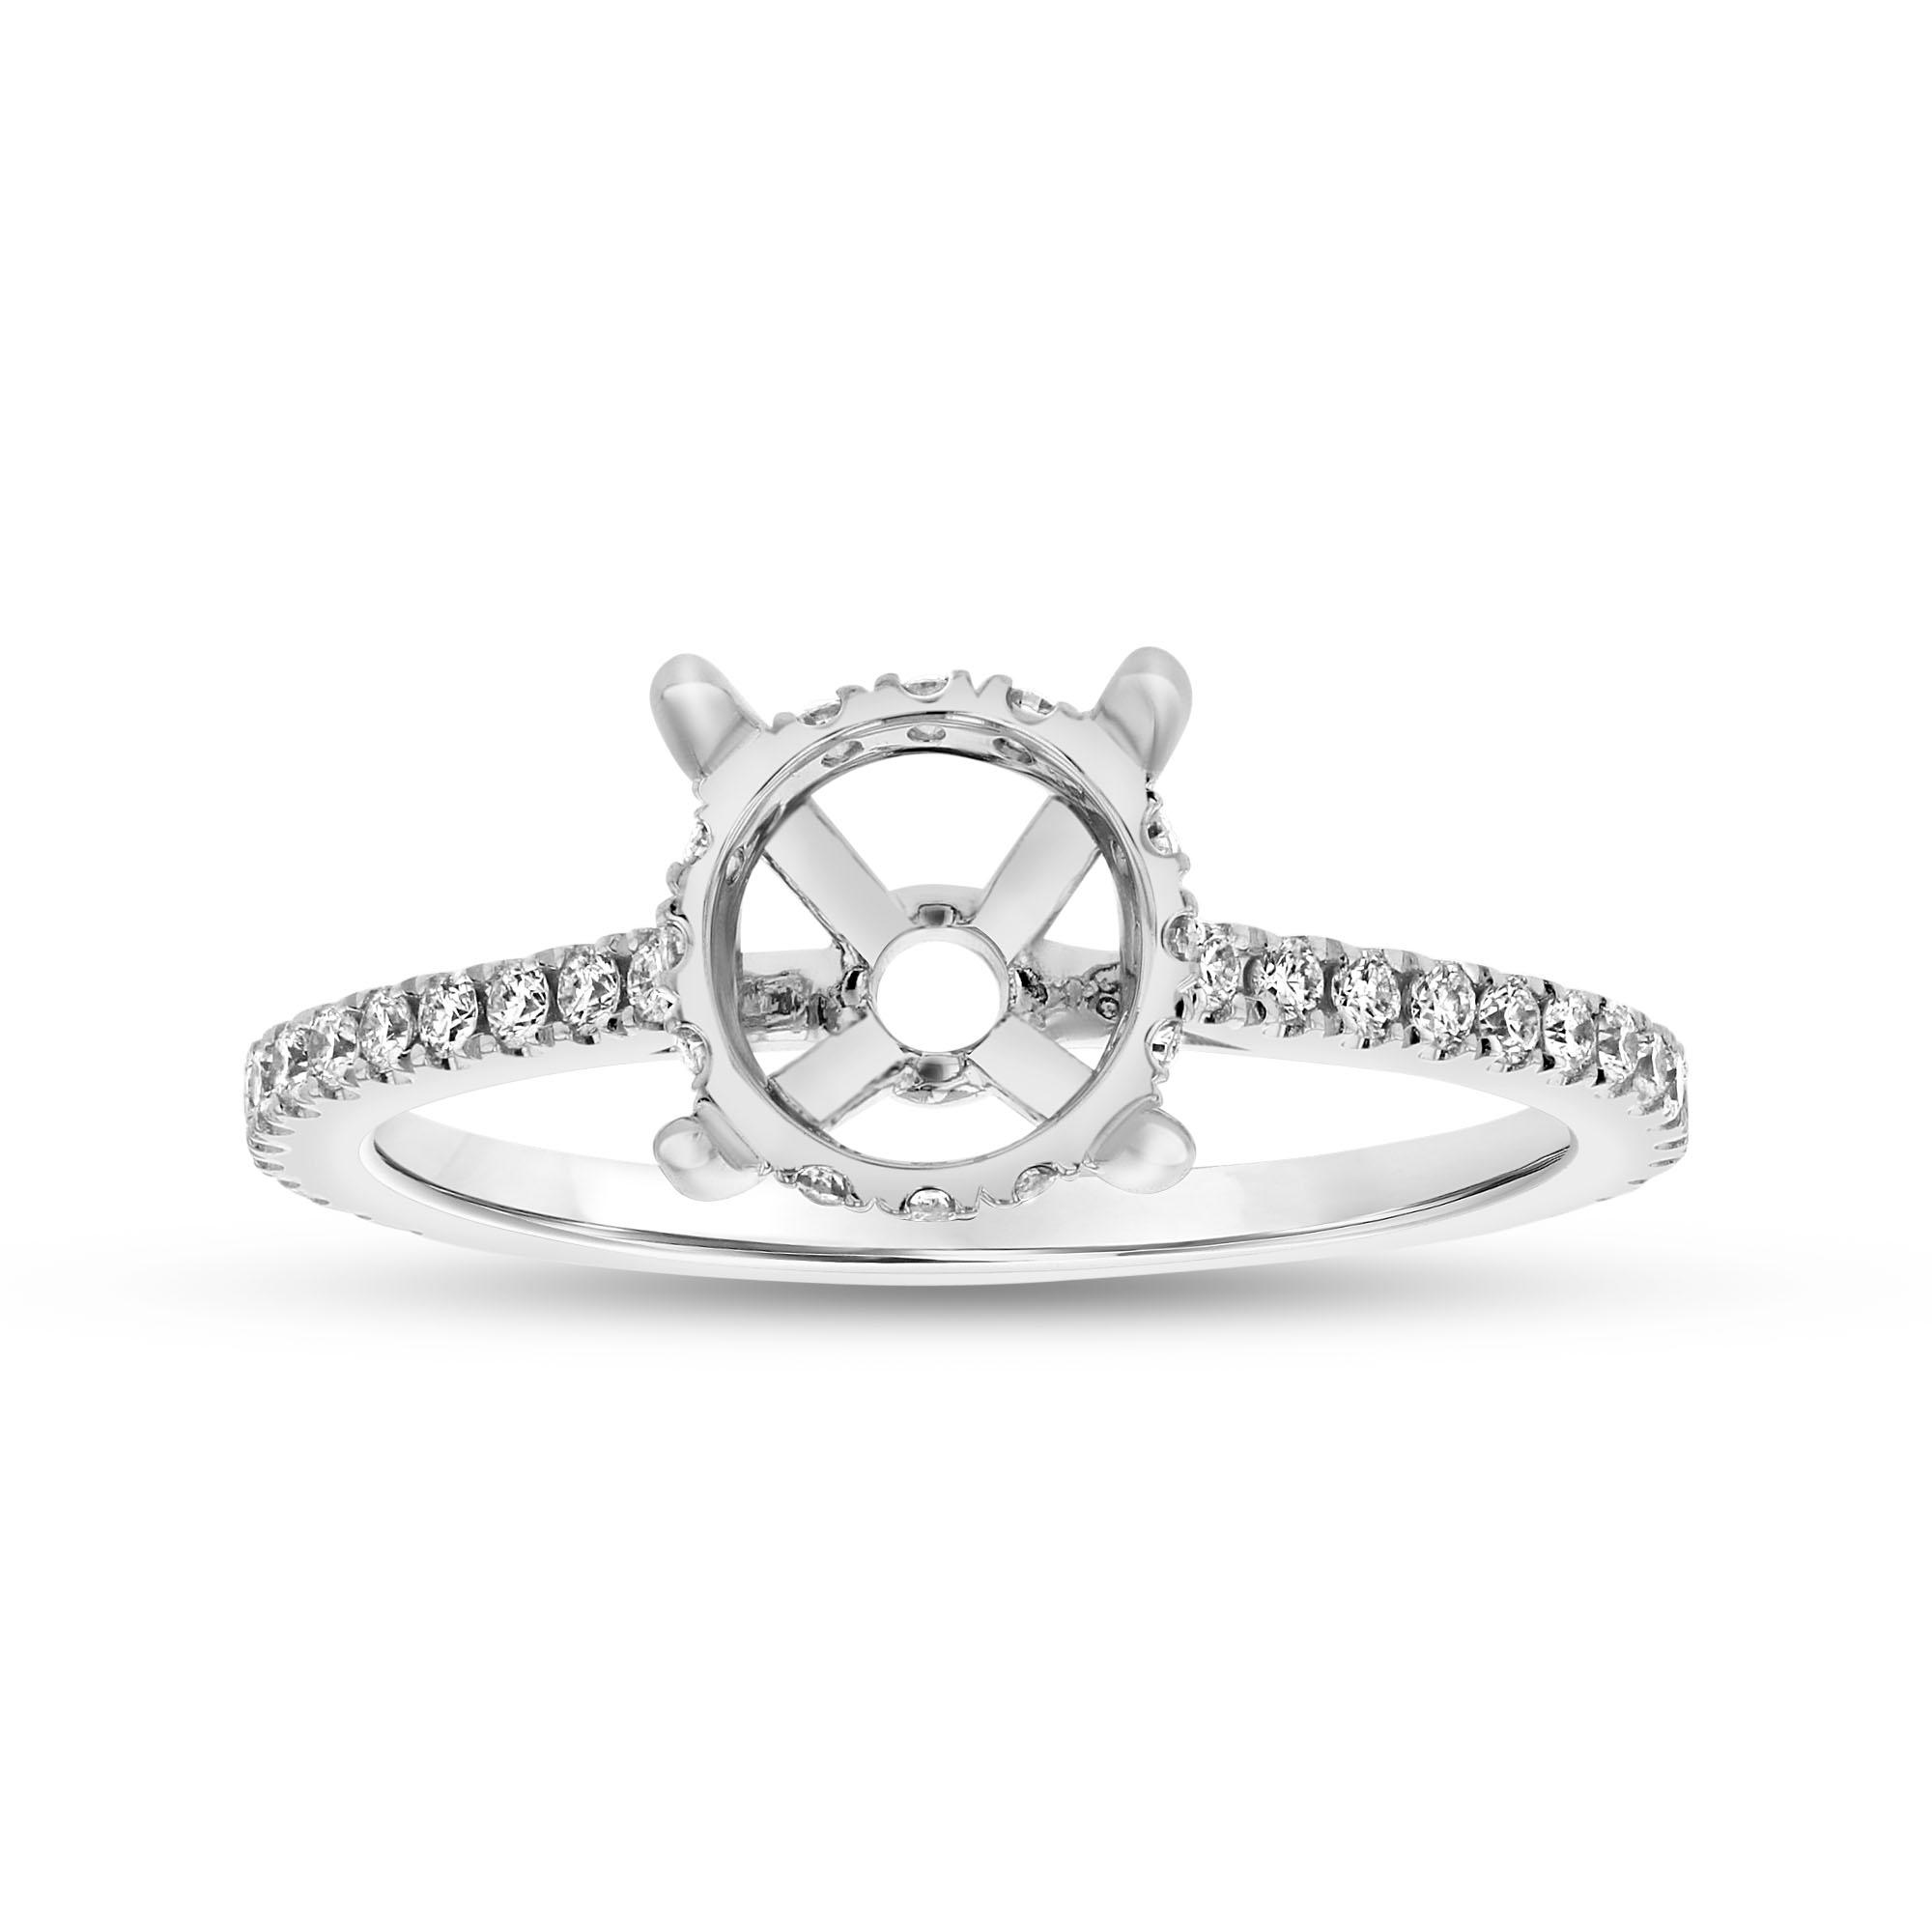 View 0.34ctw Diamond Semi Mount Under Halo Engagement Ring in 14k White Gold